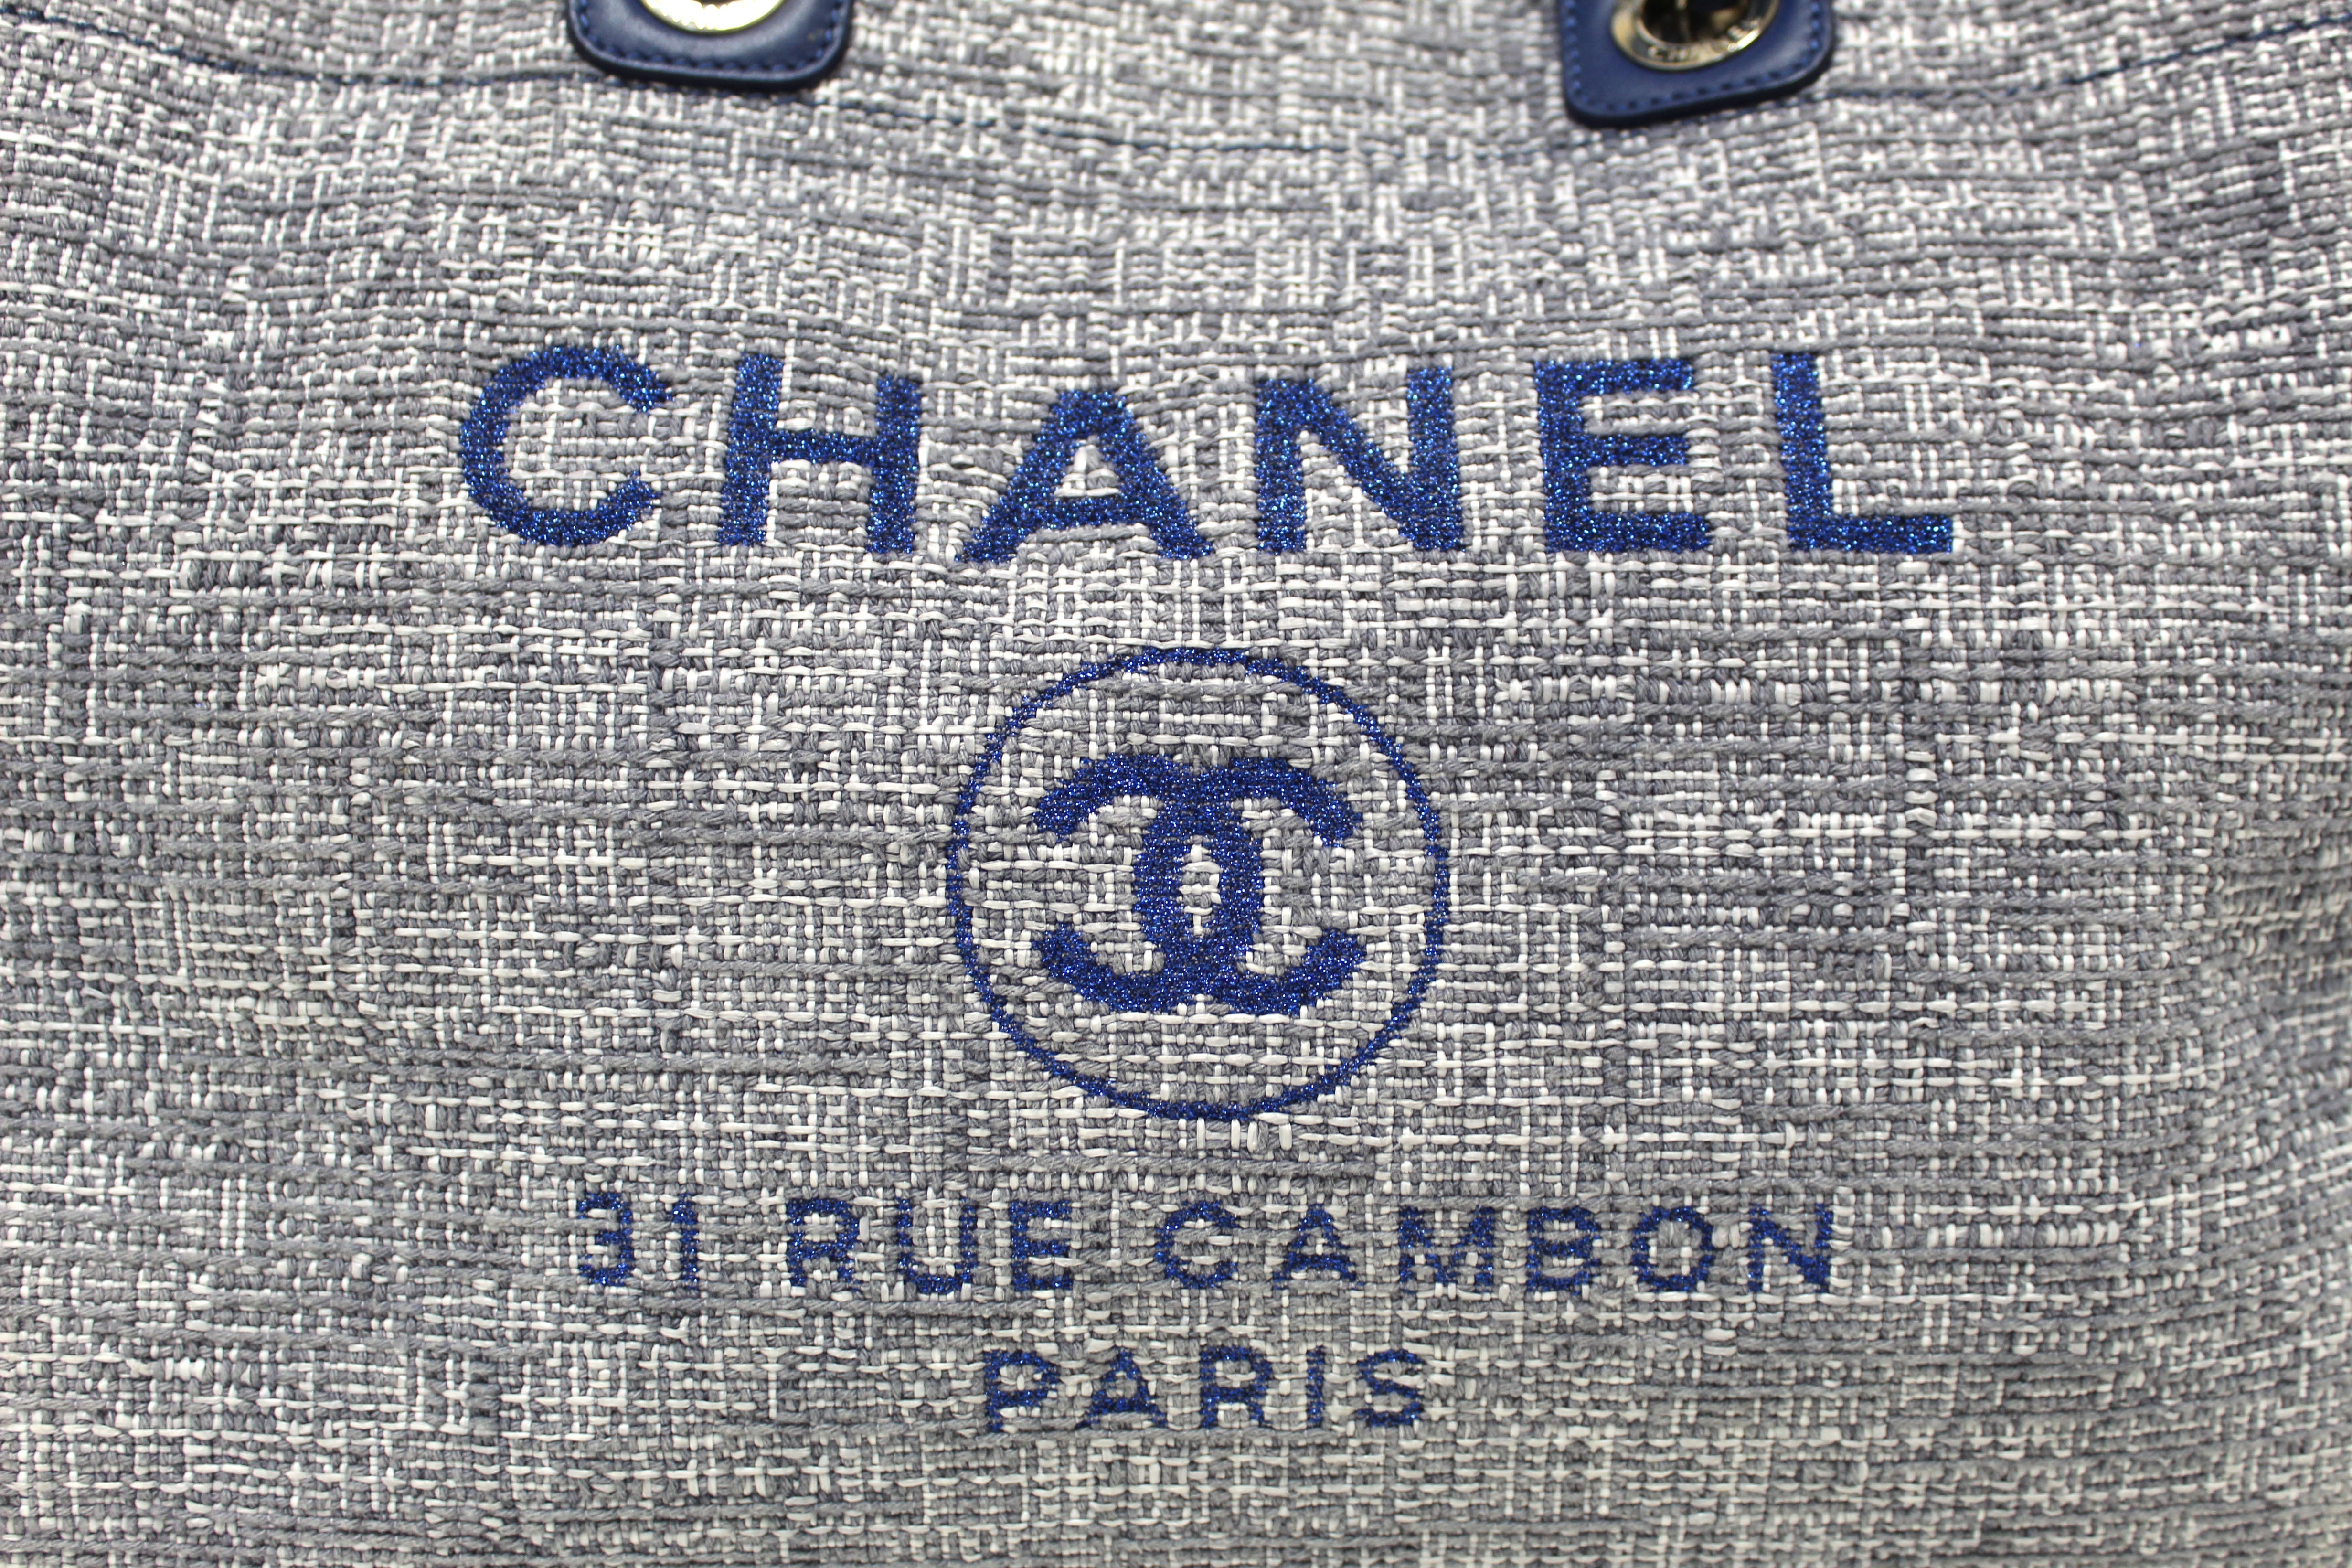 Authentic Chanel Blue Tweed Maxi Deauville Shopping Tote